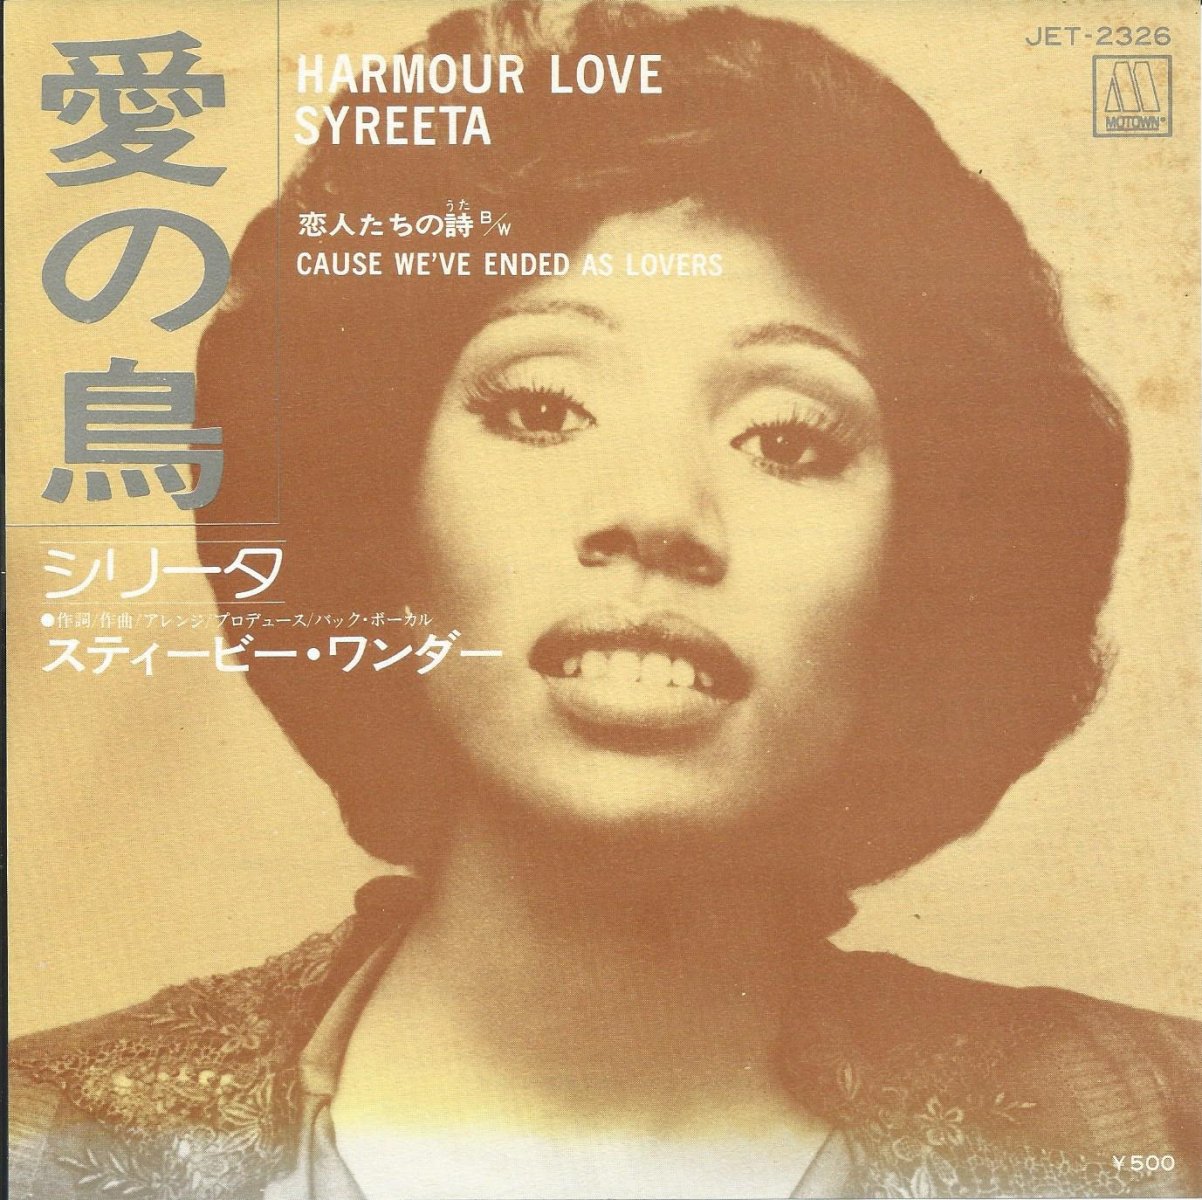 ꡼ SYREETA / Ļ HARMOUR LOVE / ͤλ CAUSE WE'VE ENDED AS LOVERS (7